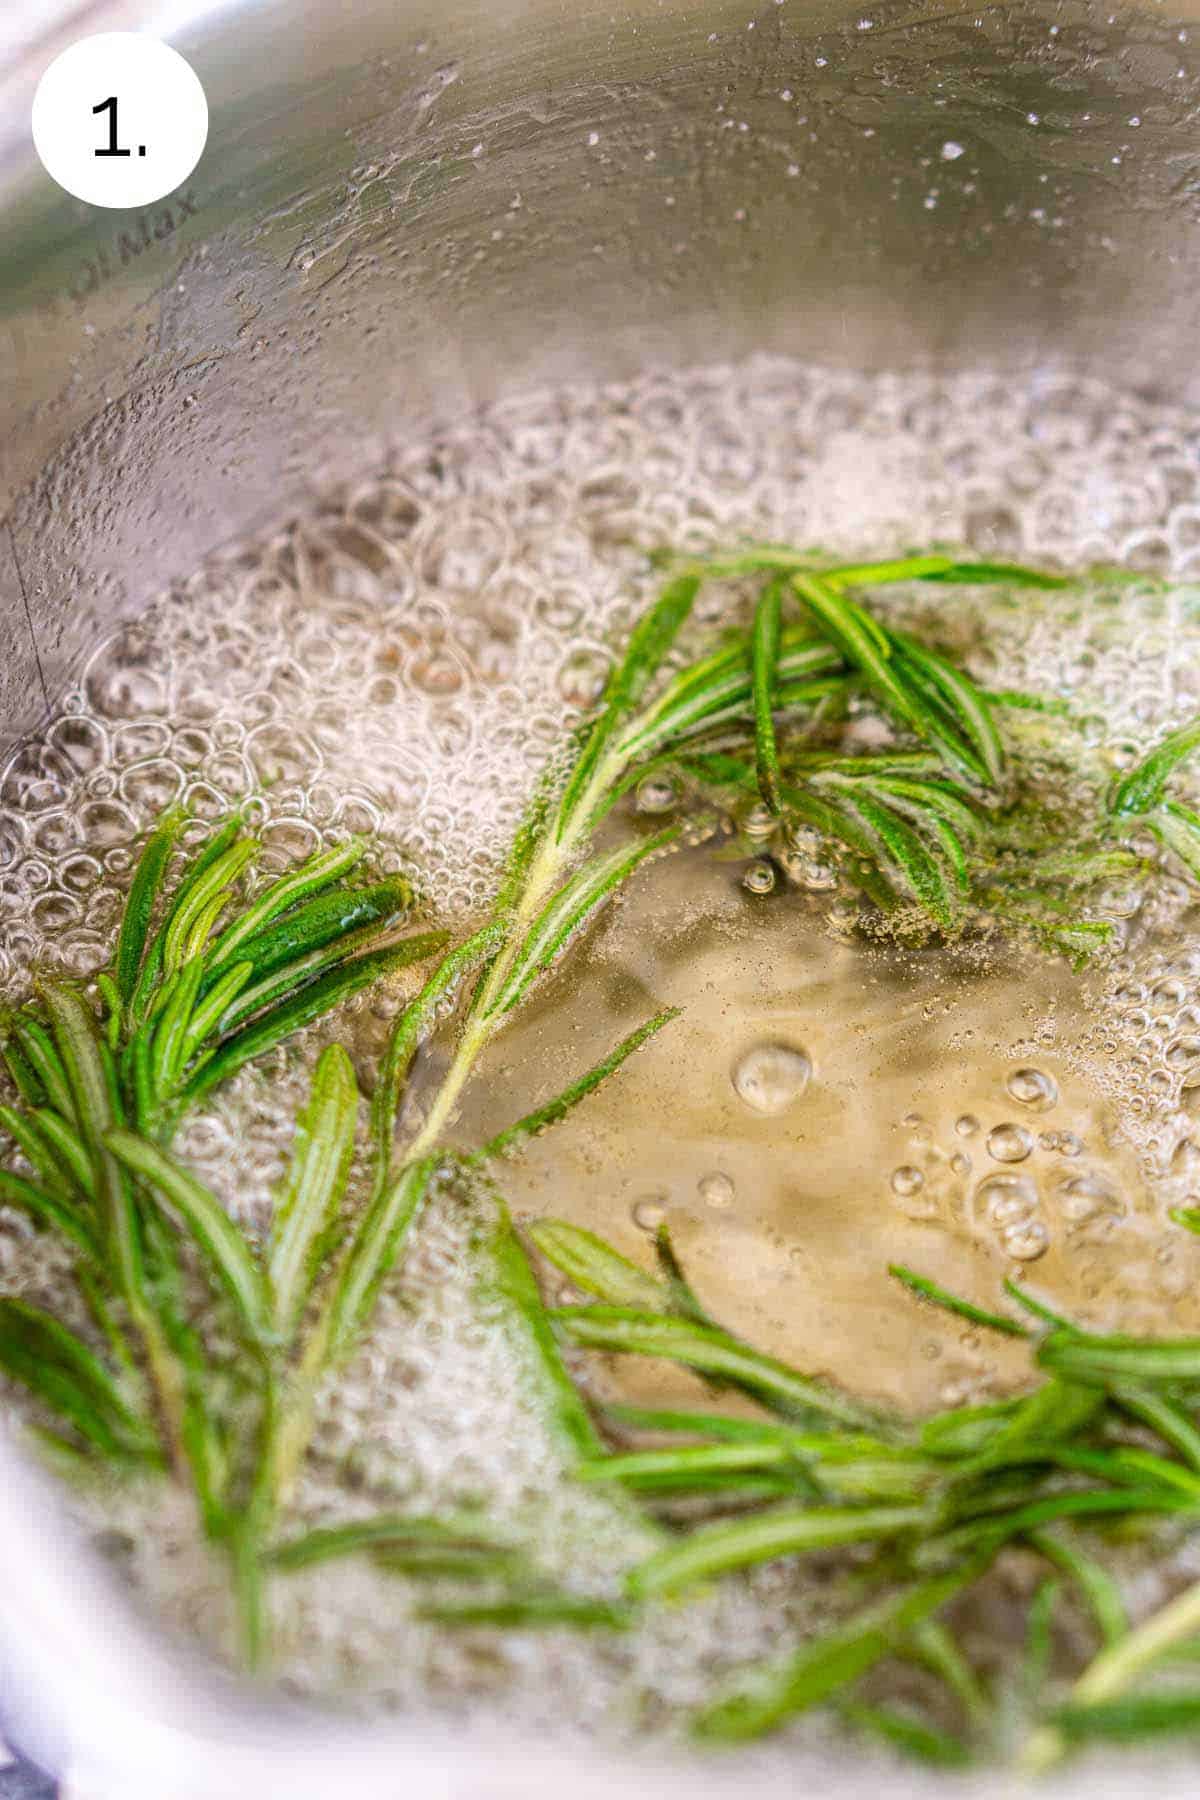 The water, sugar and rosemary boiling in a small stainless steel saucepan on the stove.